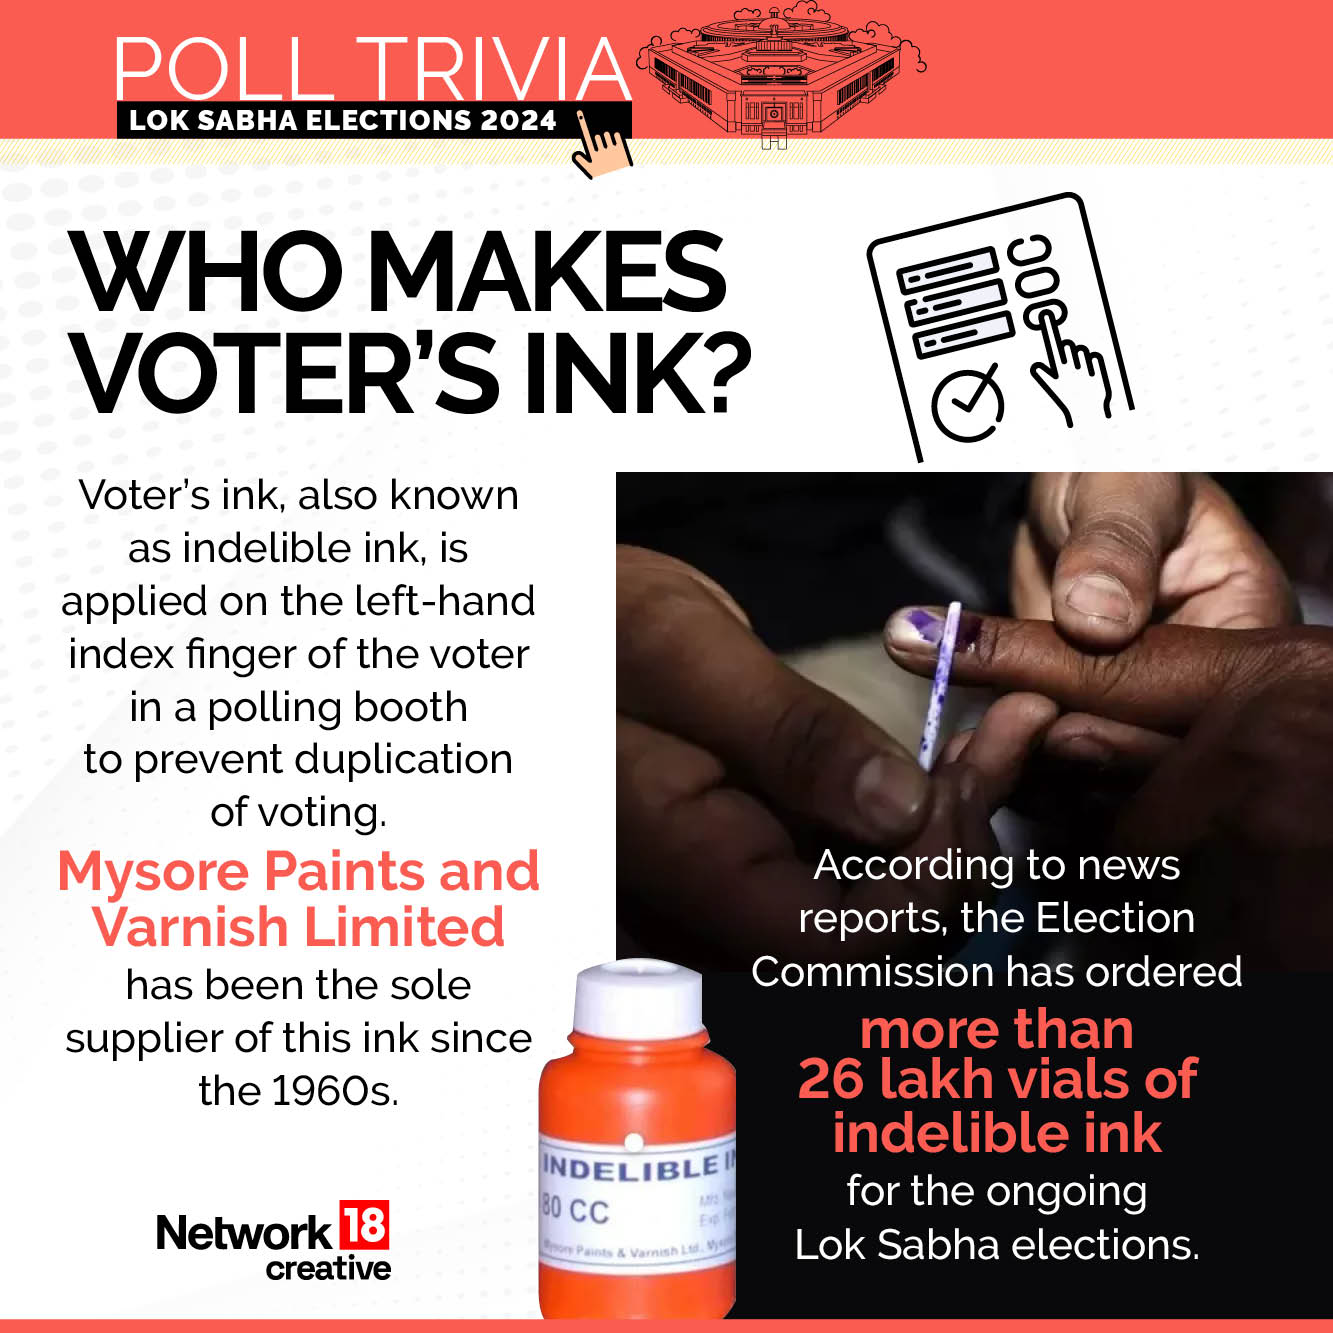 Who makes voter's ink